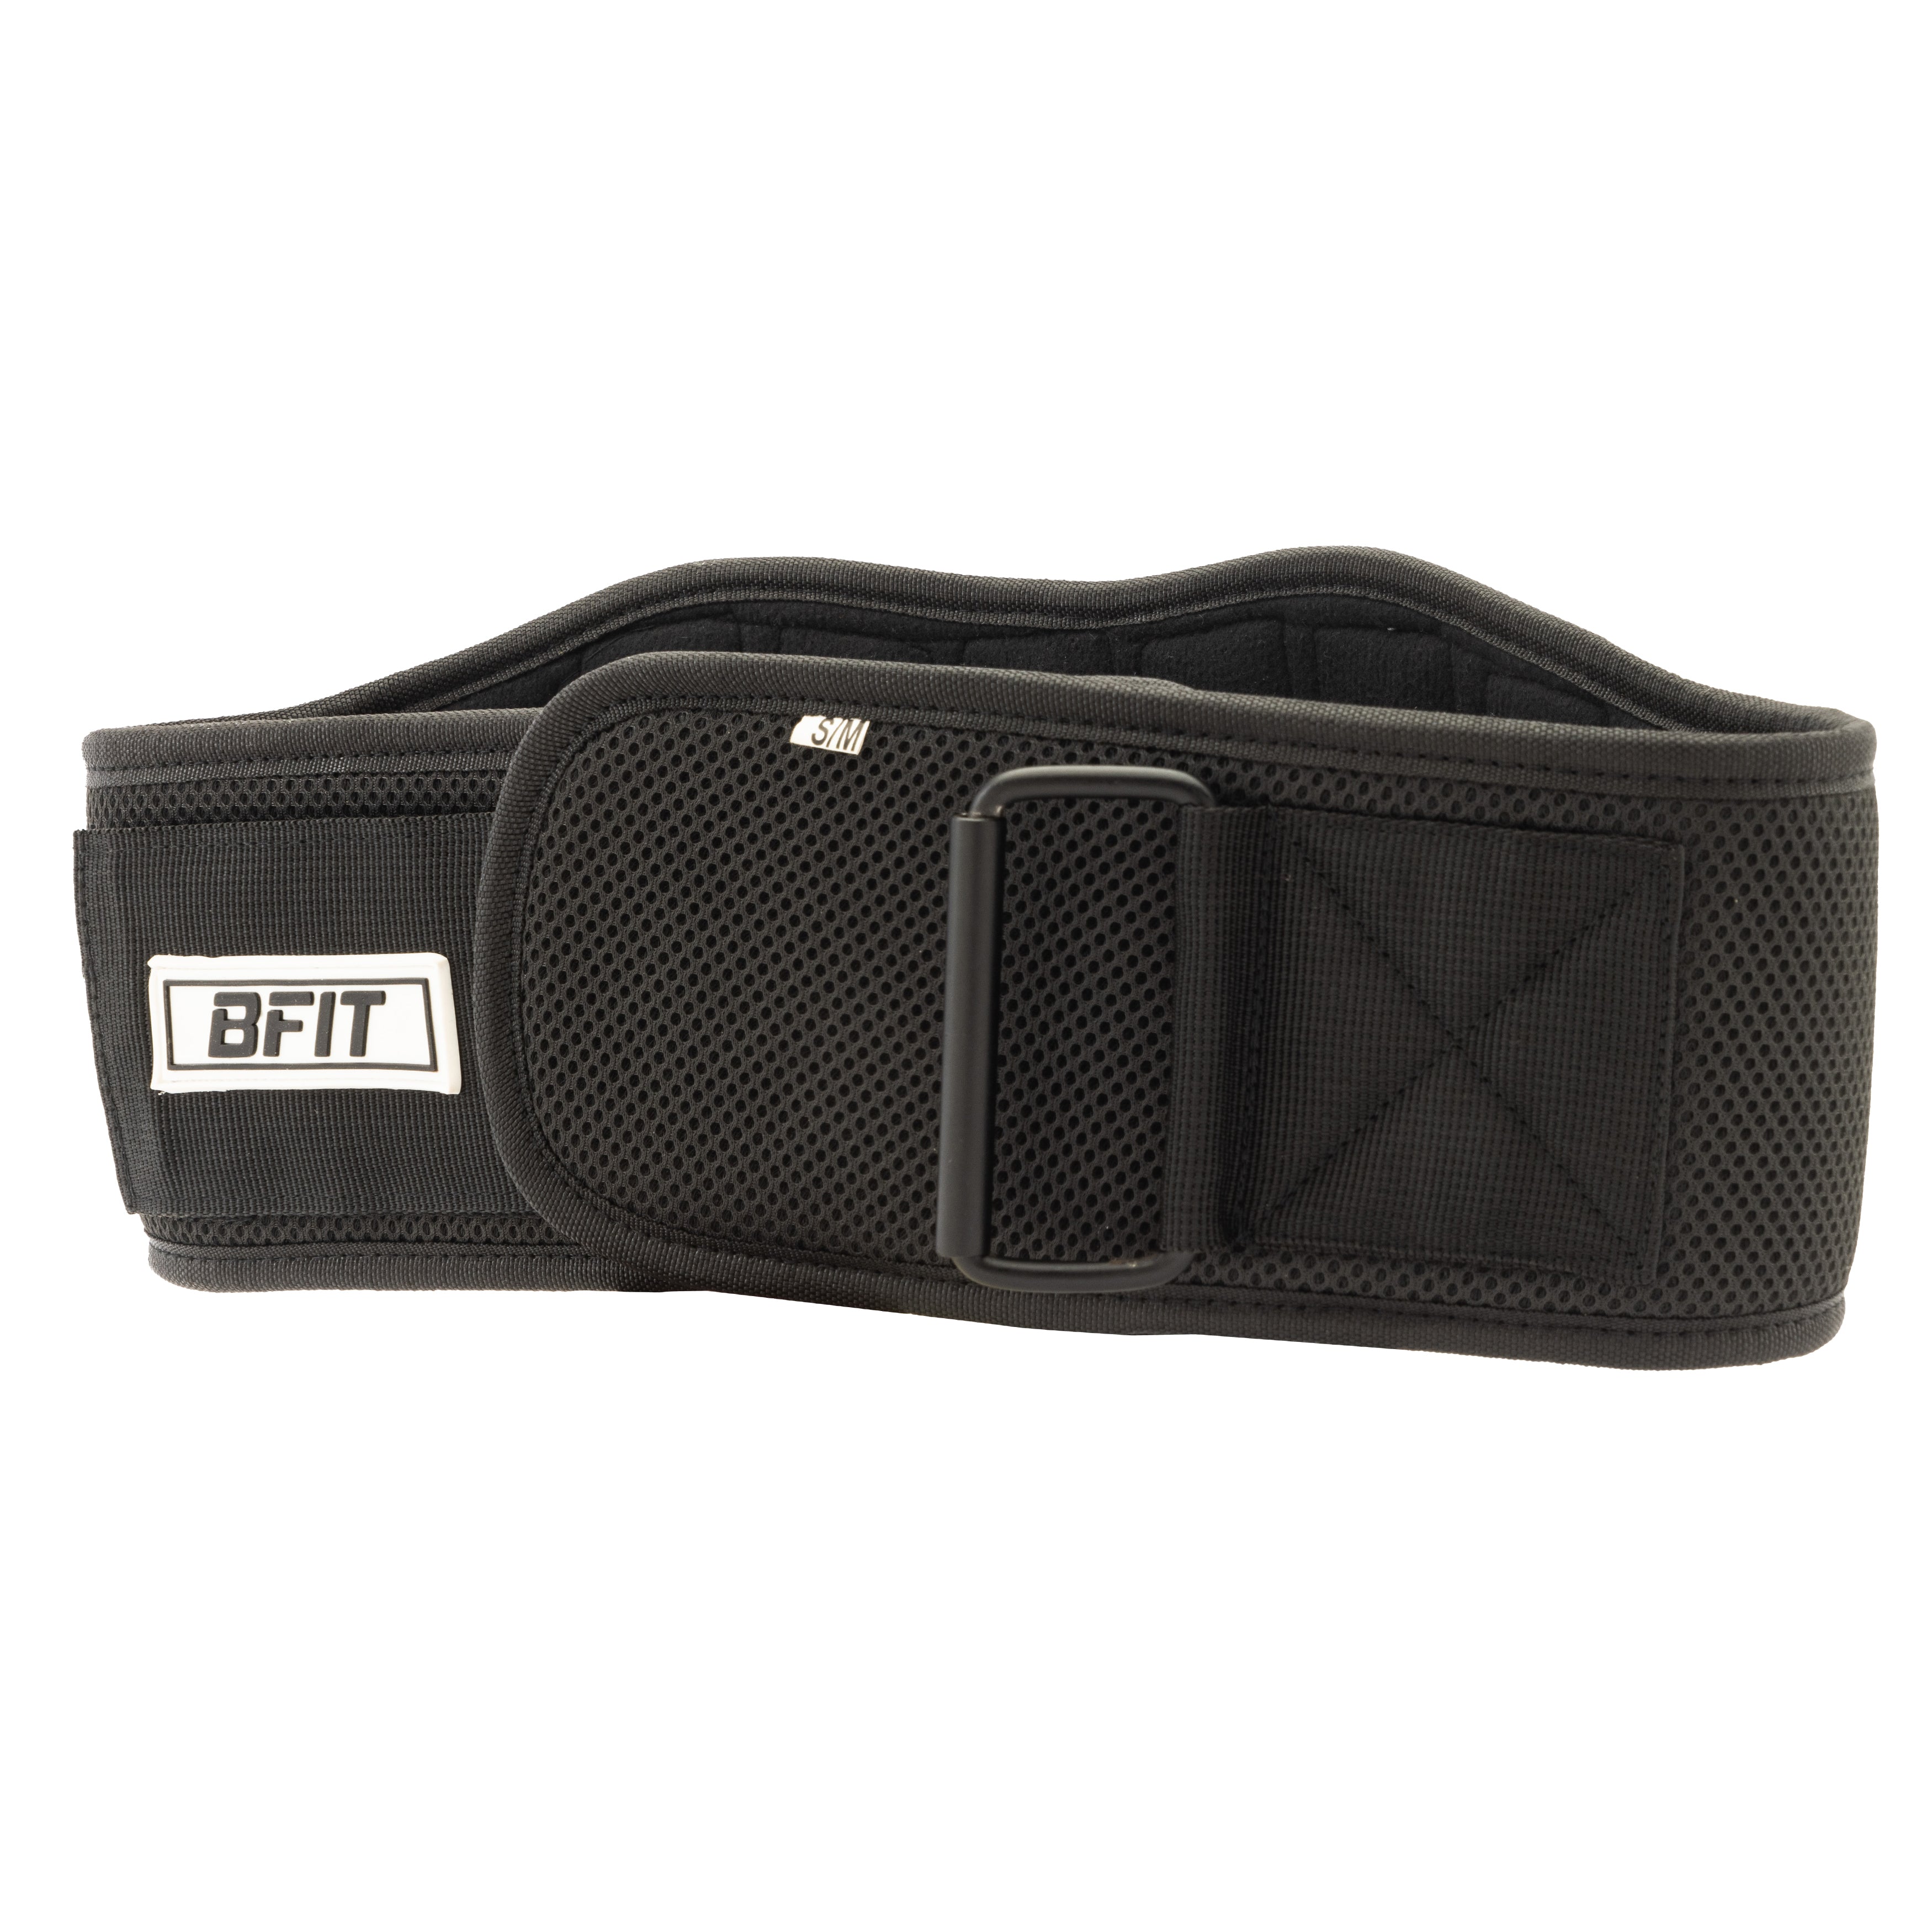 Supportive Gear for Weights  Neoprene Weightlifting black Belt – BFIT  Fashion